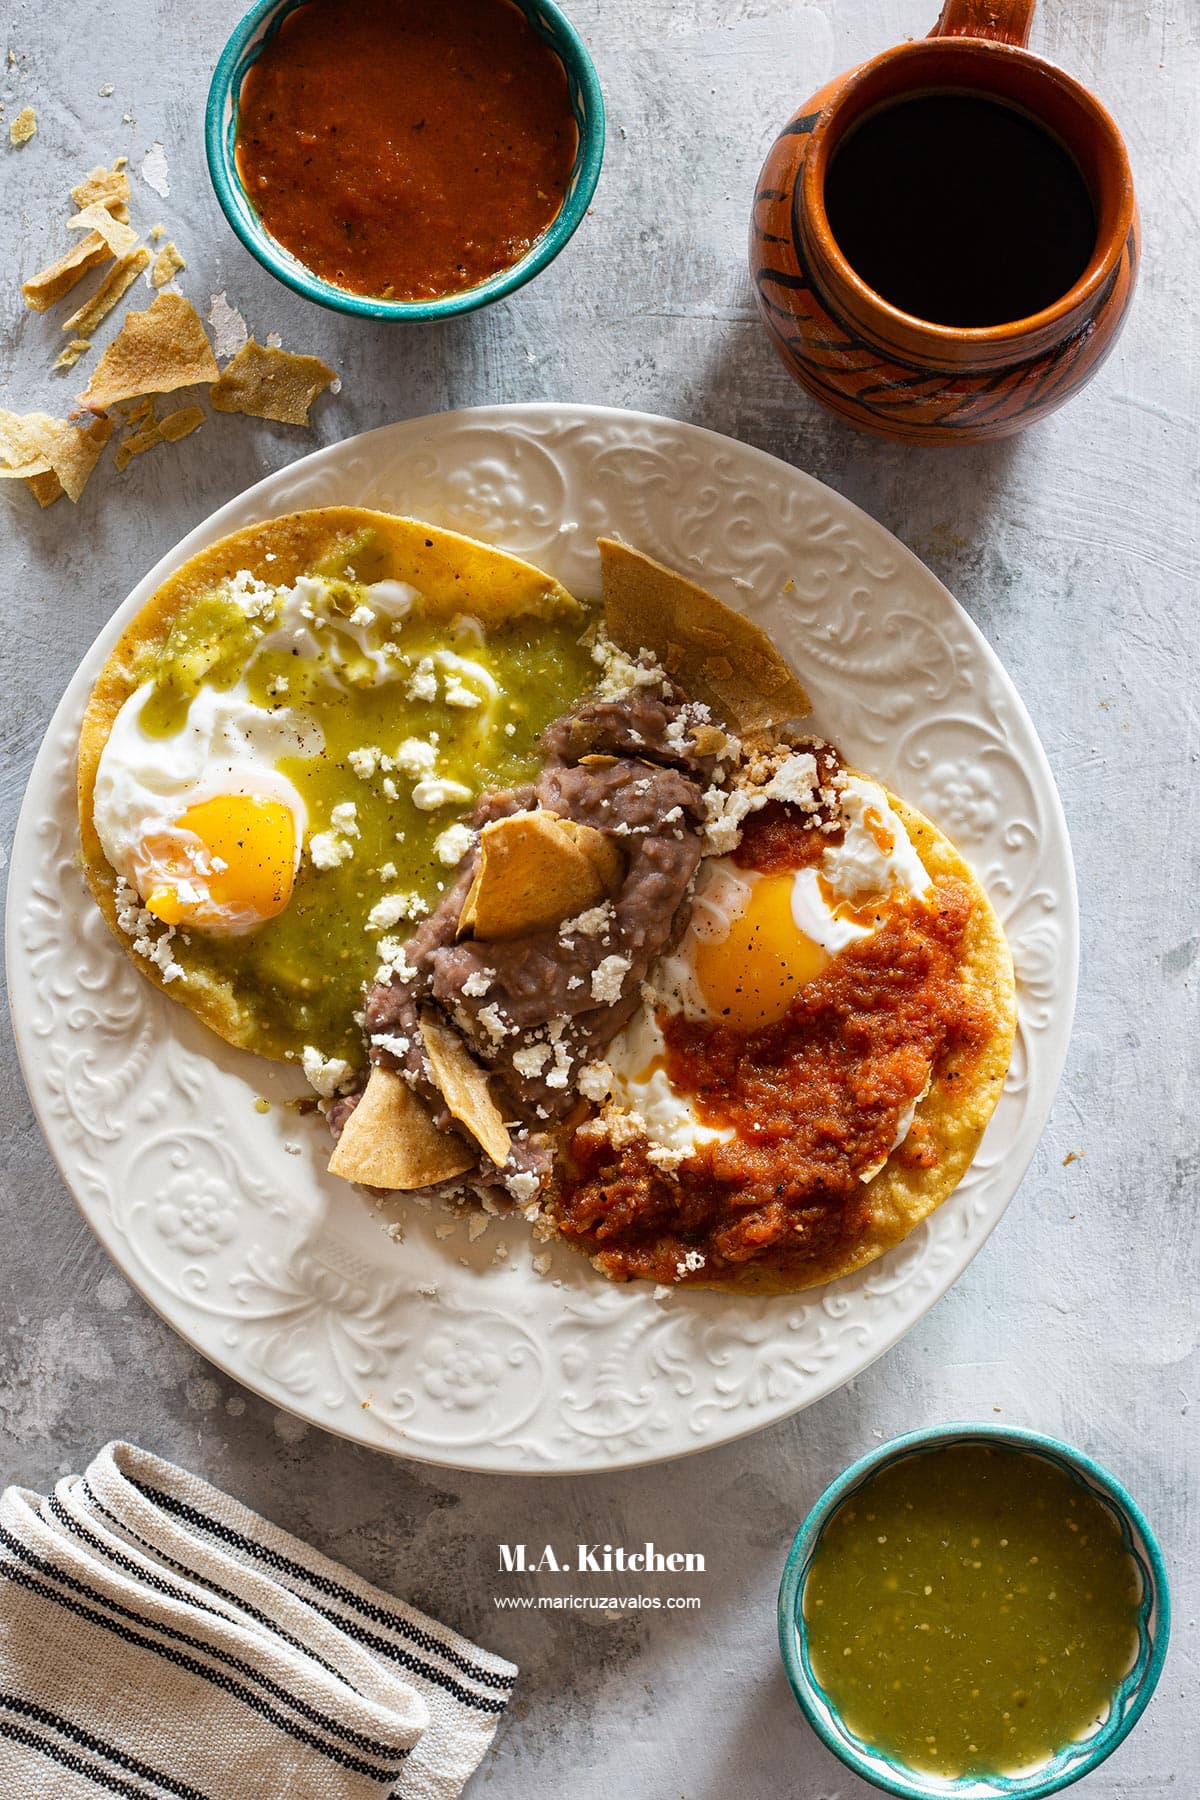 Huevos divorciados served in a plate and coffee on the side.